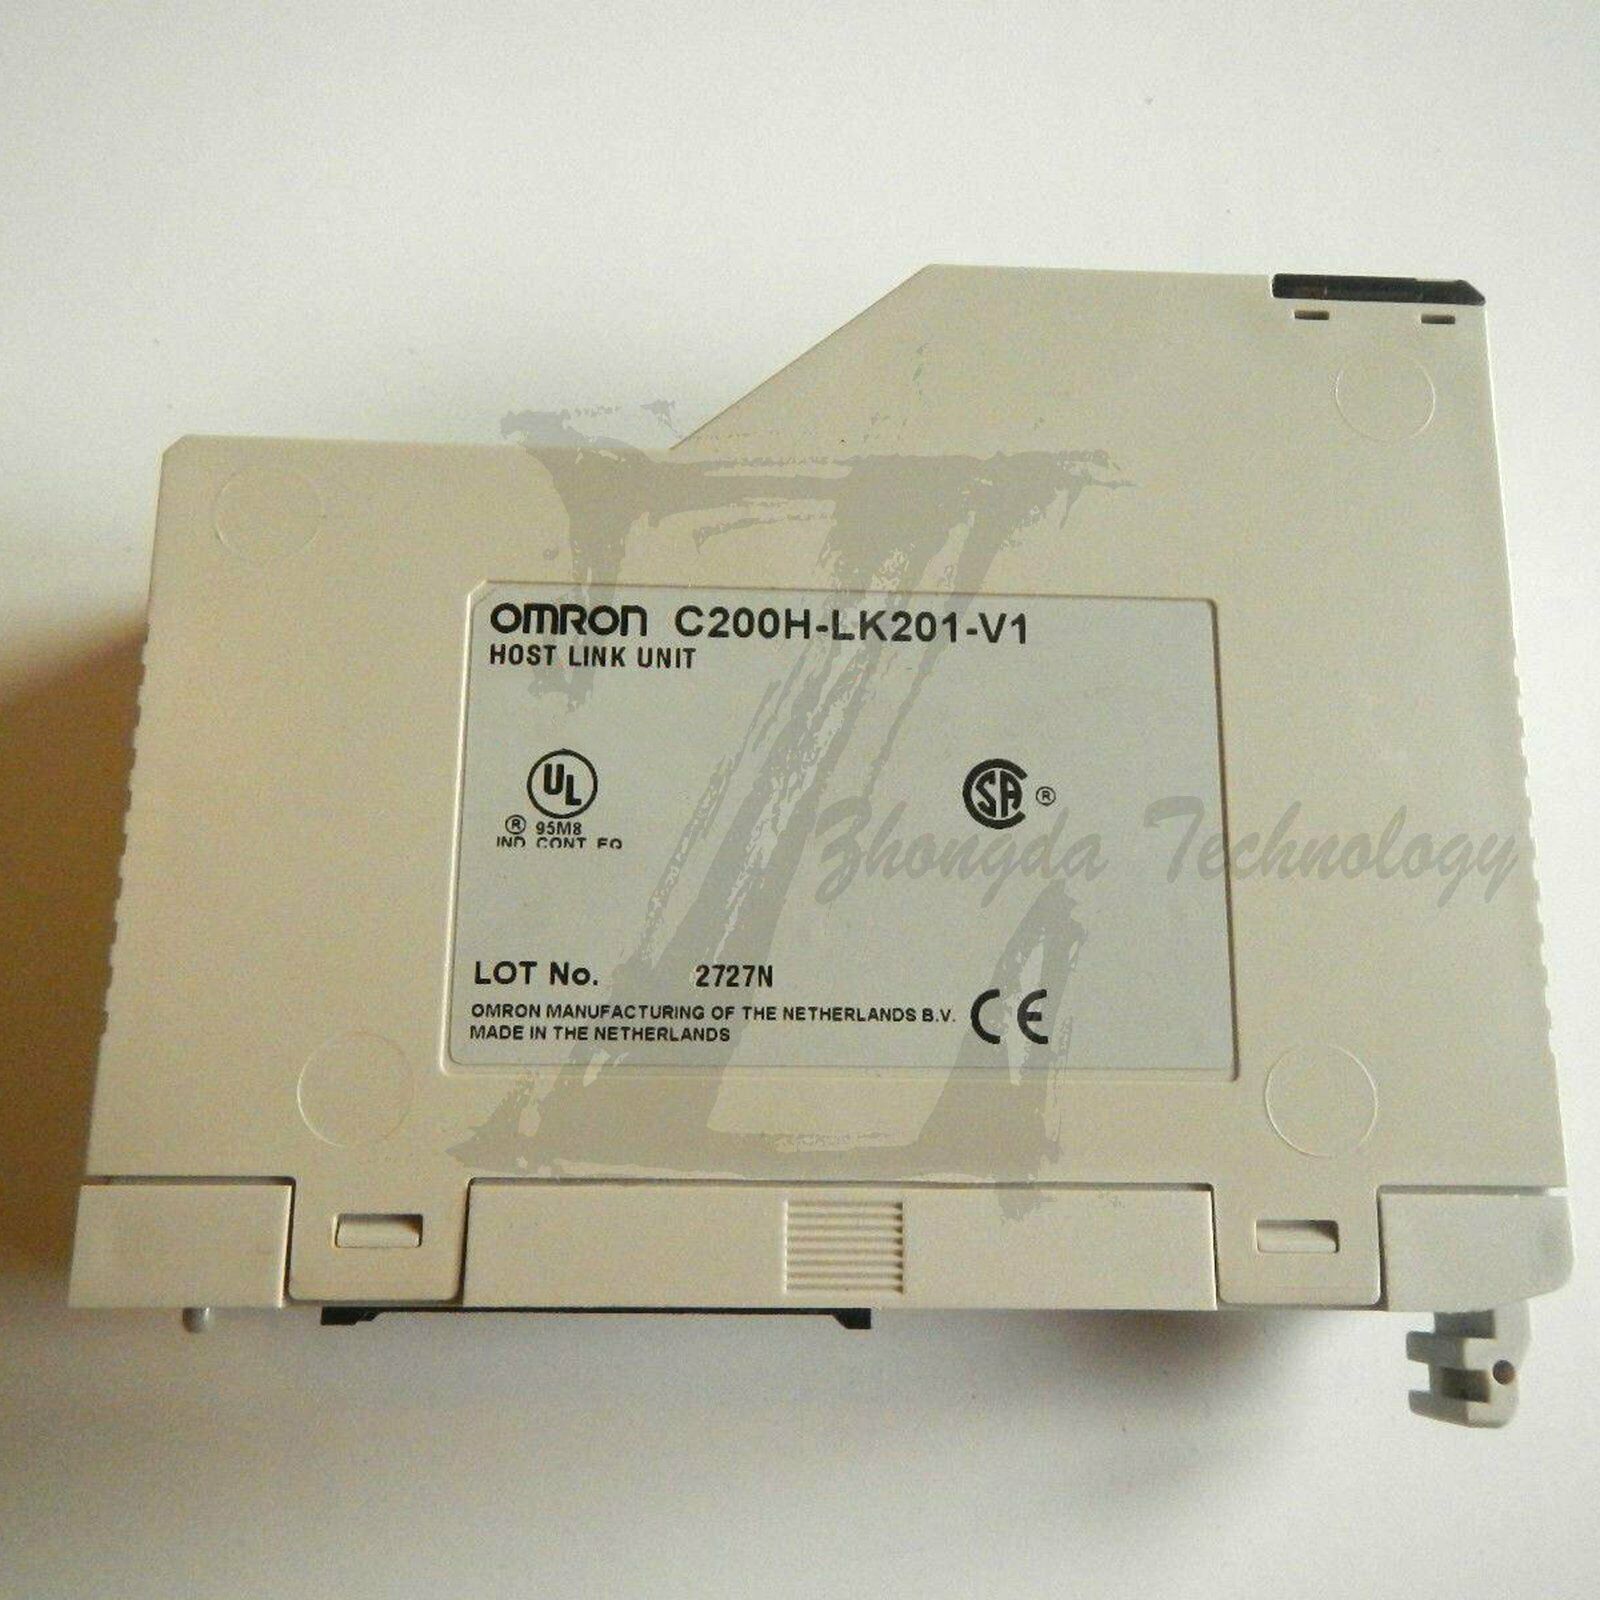 1pc new Omron C200H-LK201-V1 module one year warranty KOEED 1, 80%, import_2020_10_10_031751, Omron, Other